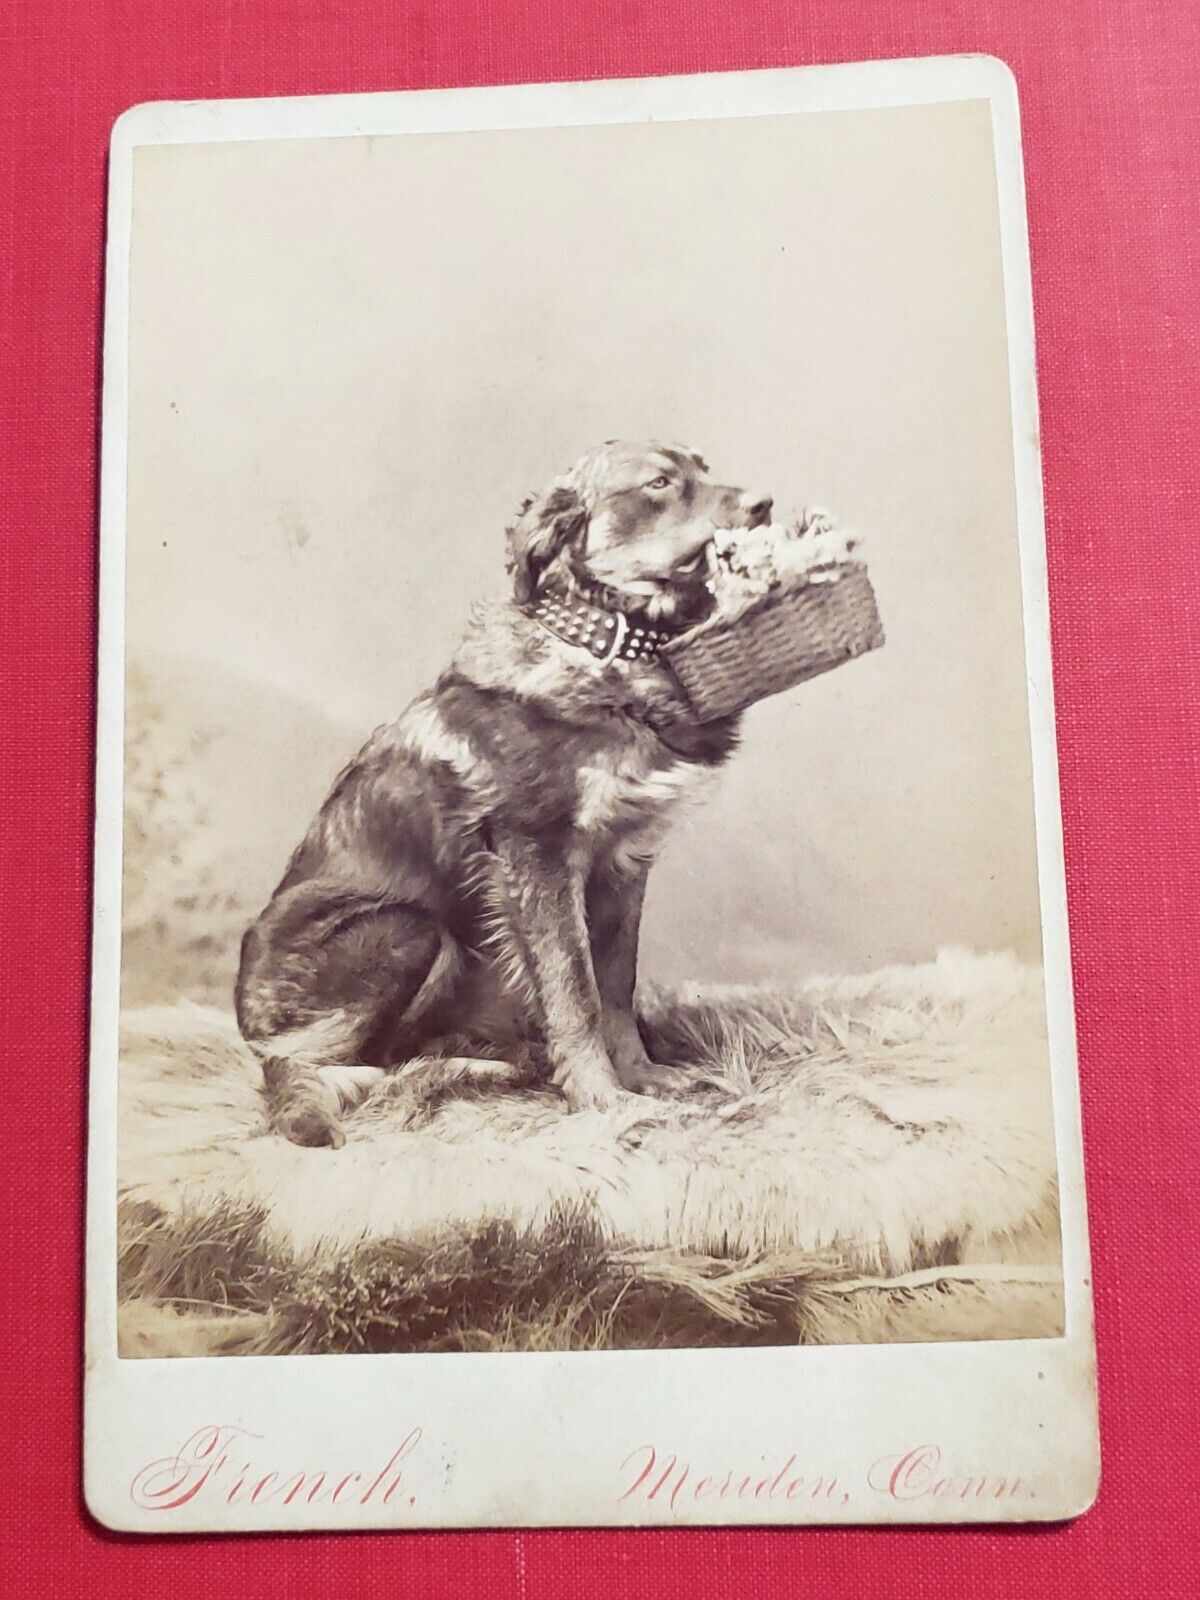 SWEET ANTIQUE DOG HOLDING BASKET OF FLOWERS CABINET CARD  BY FRENCH MERIDEN, CT